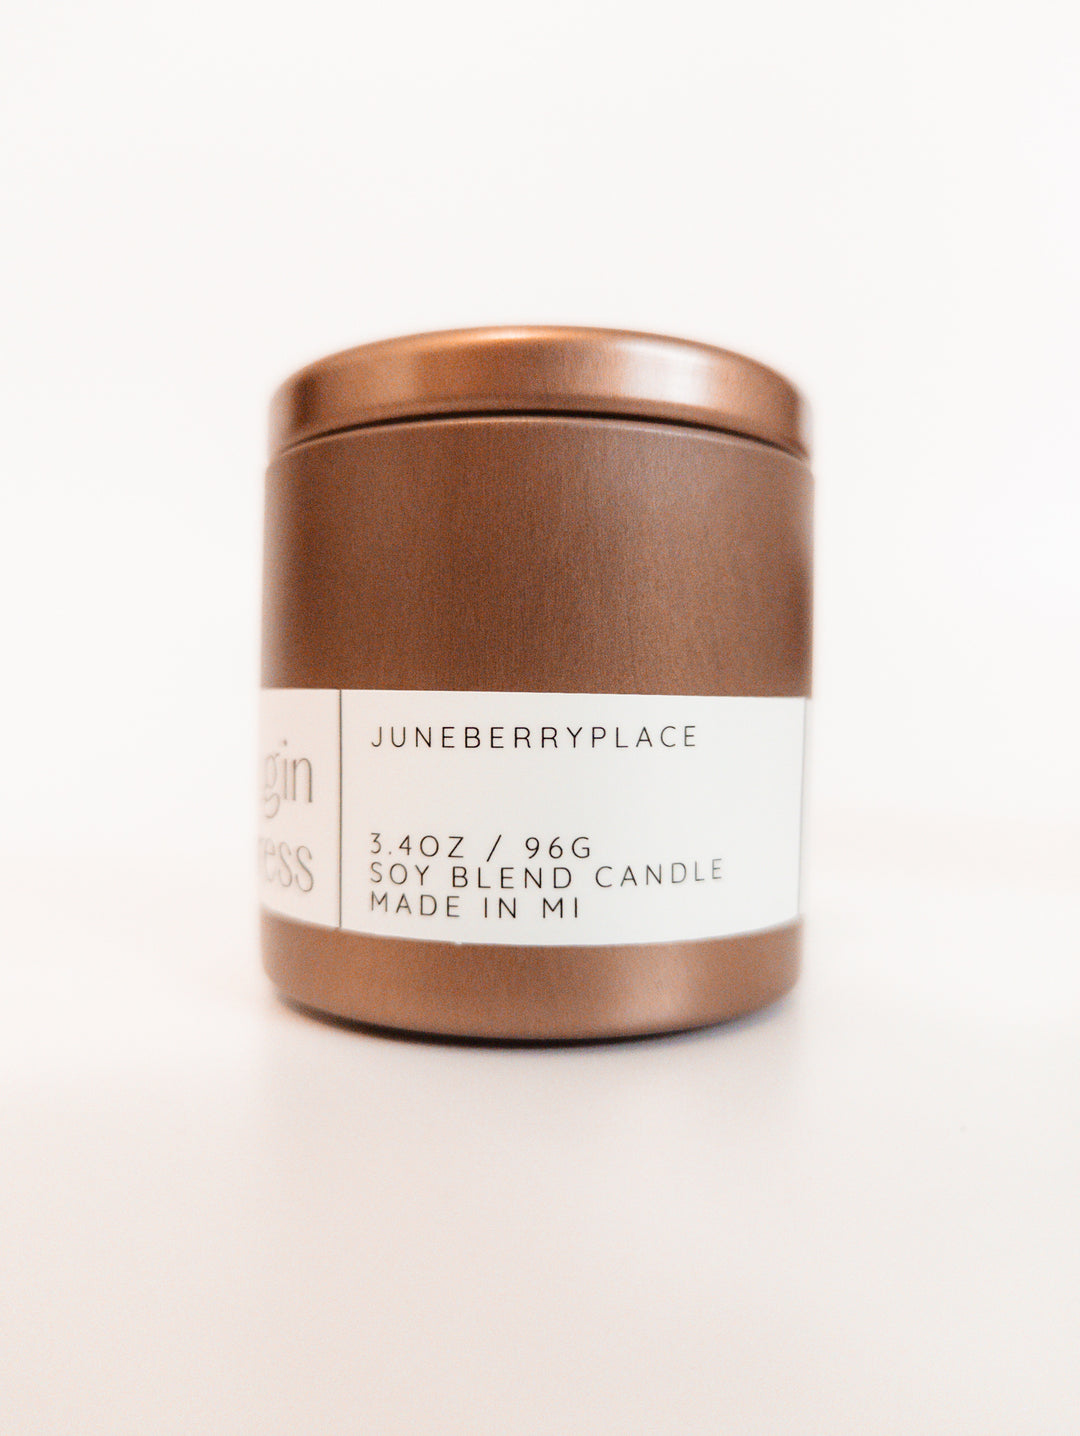 Dry Gin and Cypress Wood Wick Soy Candle in holiday bronze vessel by juneberryplace home fragrances